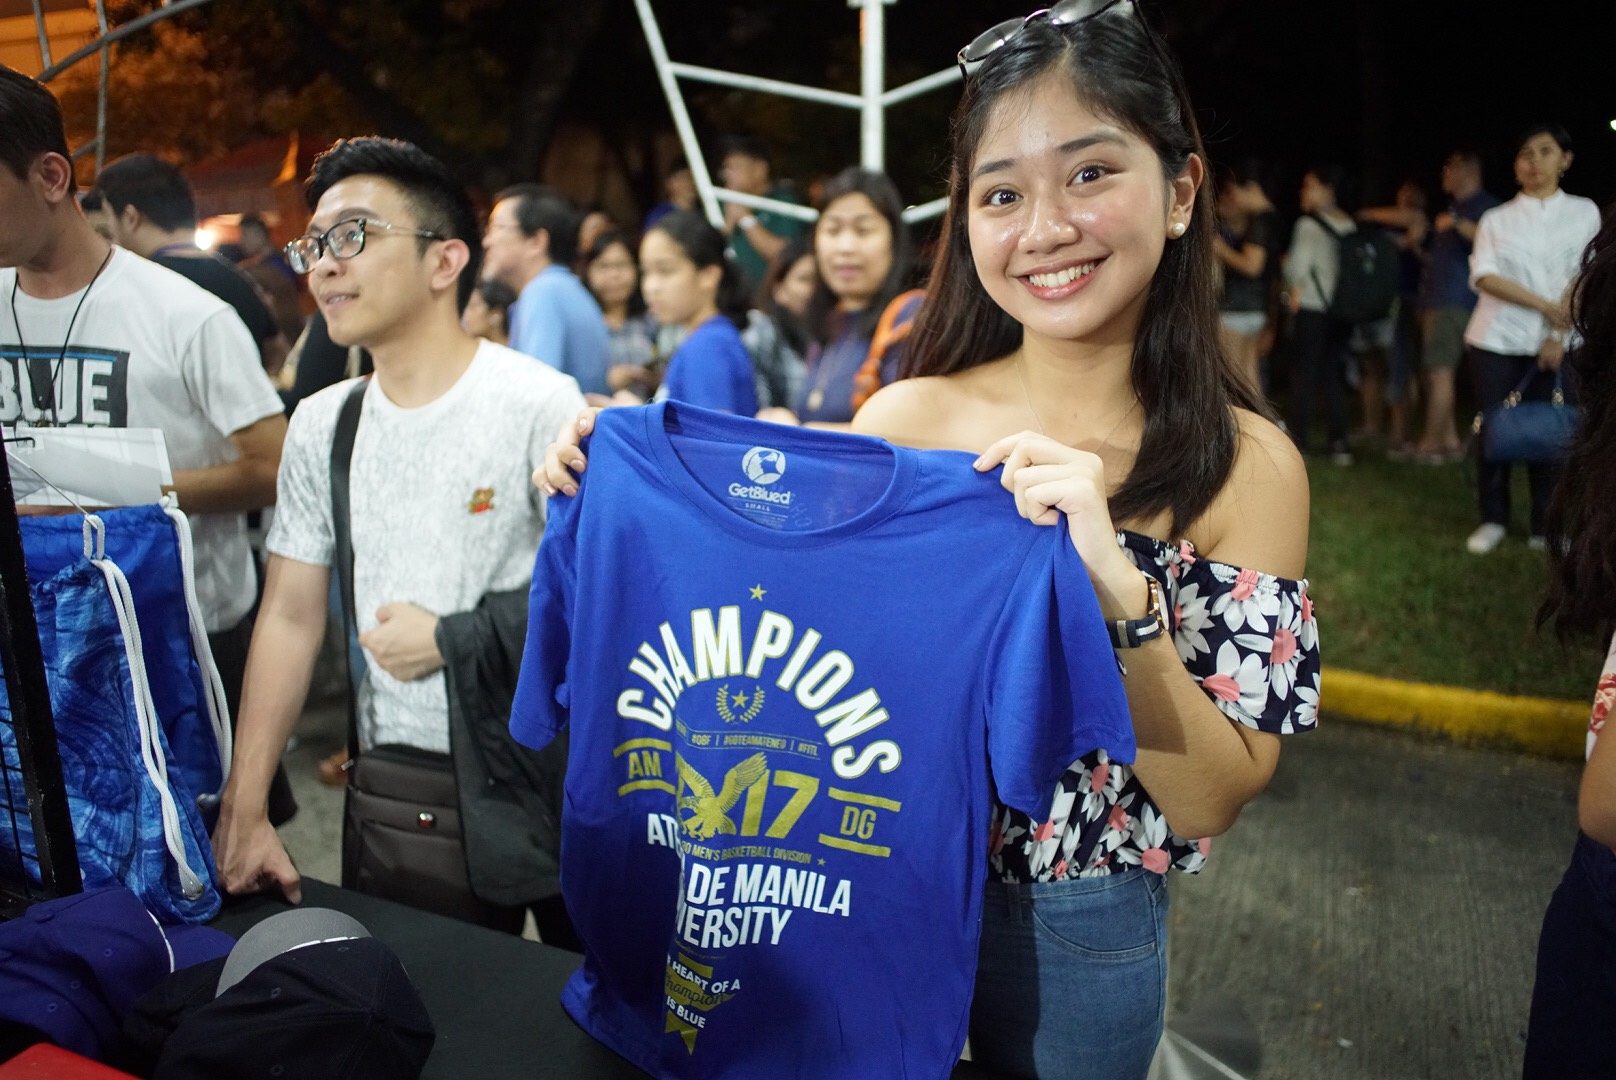 CHAMPIONSHIP SHIRT. As expected, there was a long queue for the Get Blued '2017 Champions' shirts which are selling out fast. There are just some lucky people who were able to get a hold of their size. Photo by Martin San Diego/Rappler 